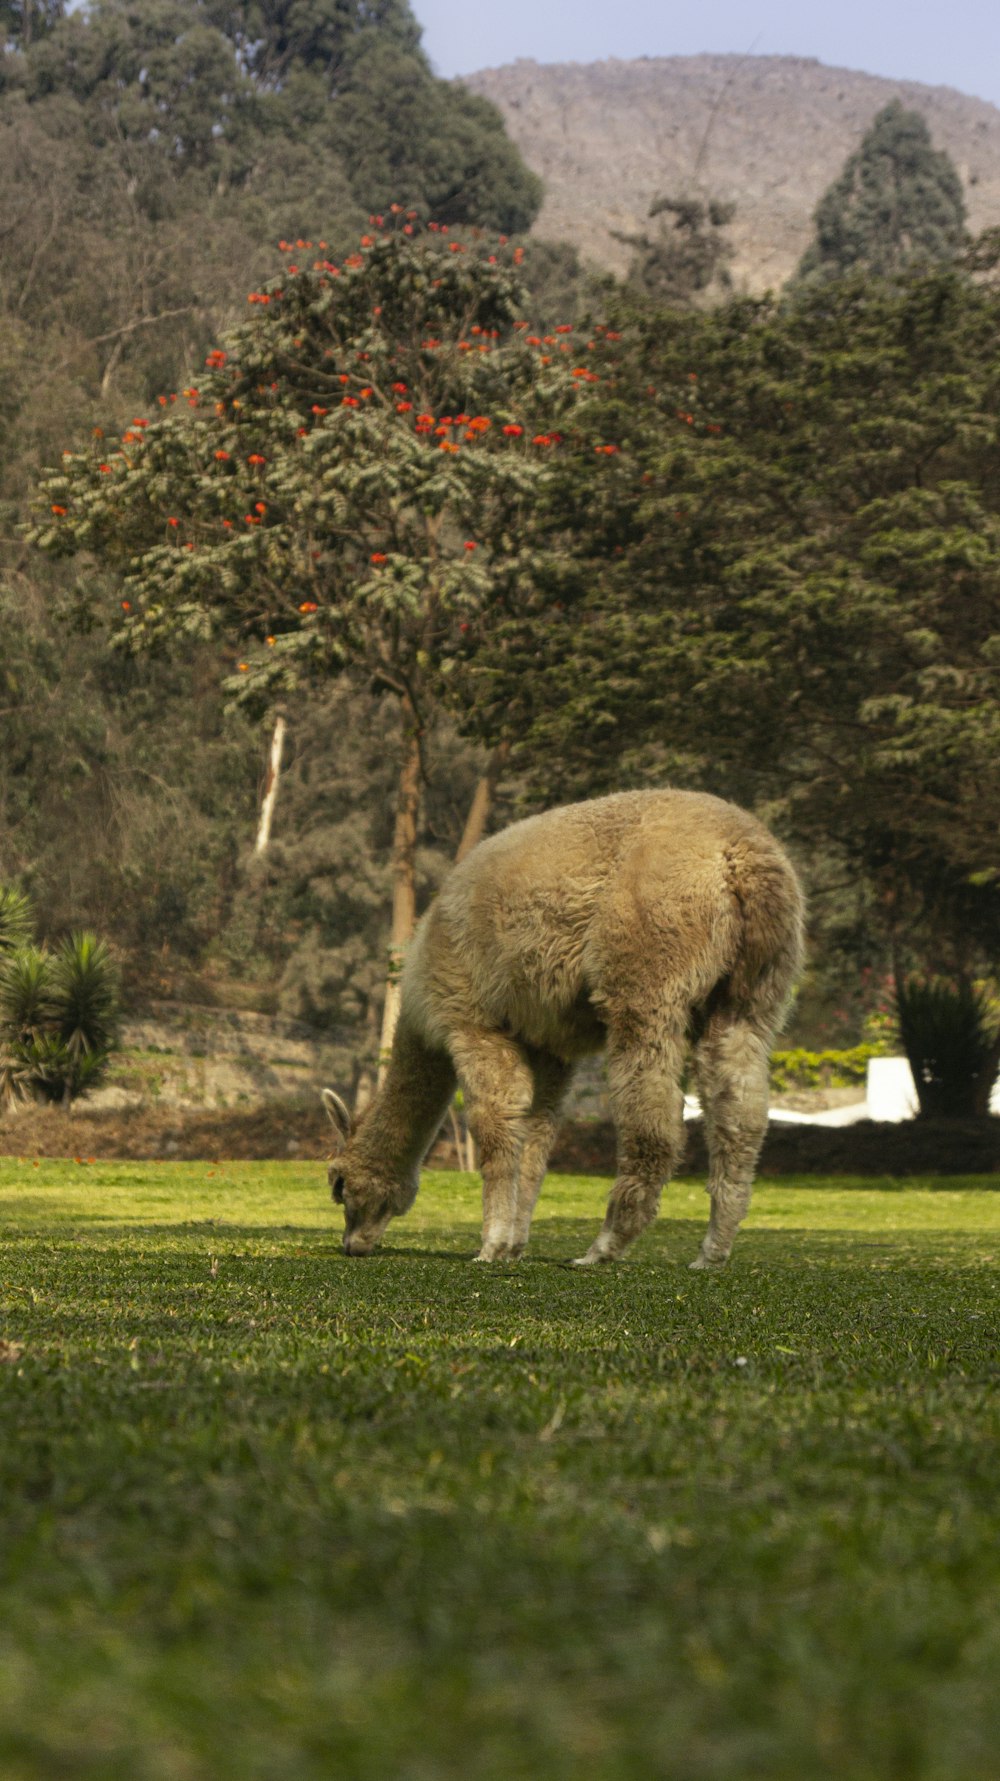 a large animal eating grass